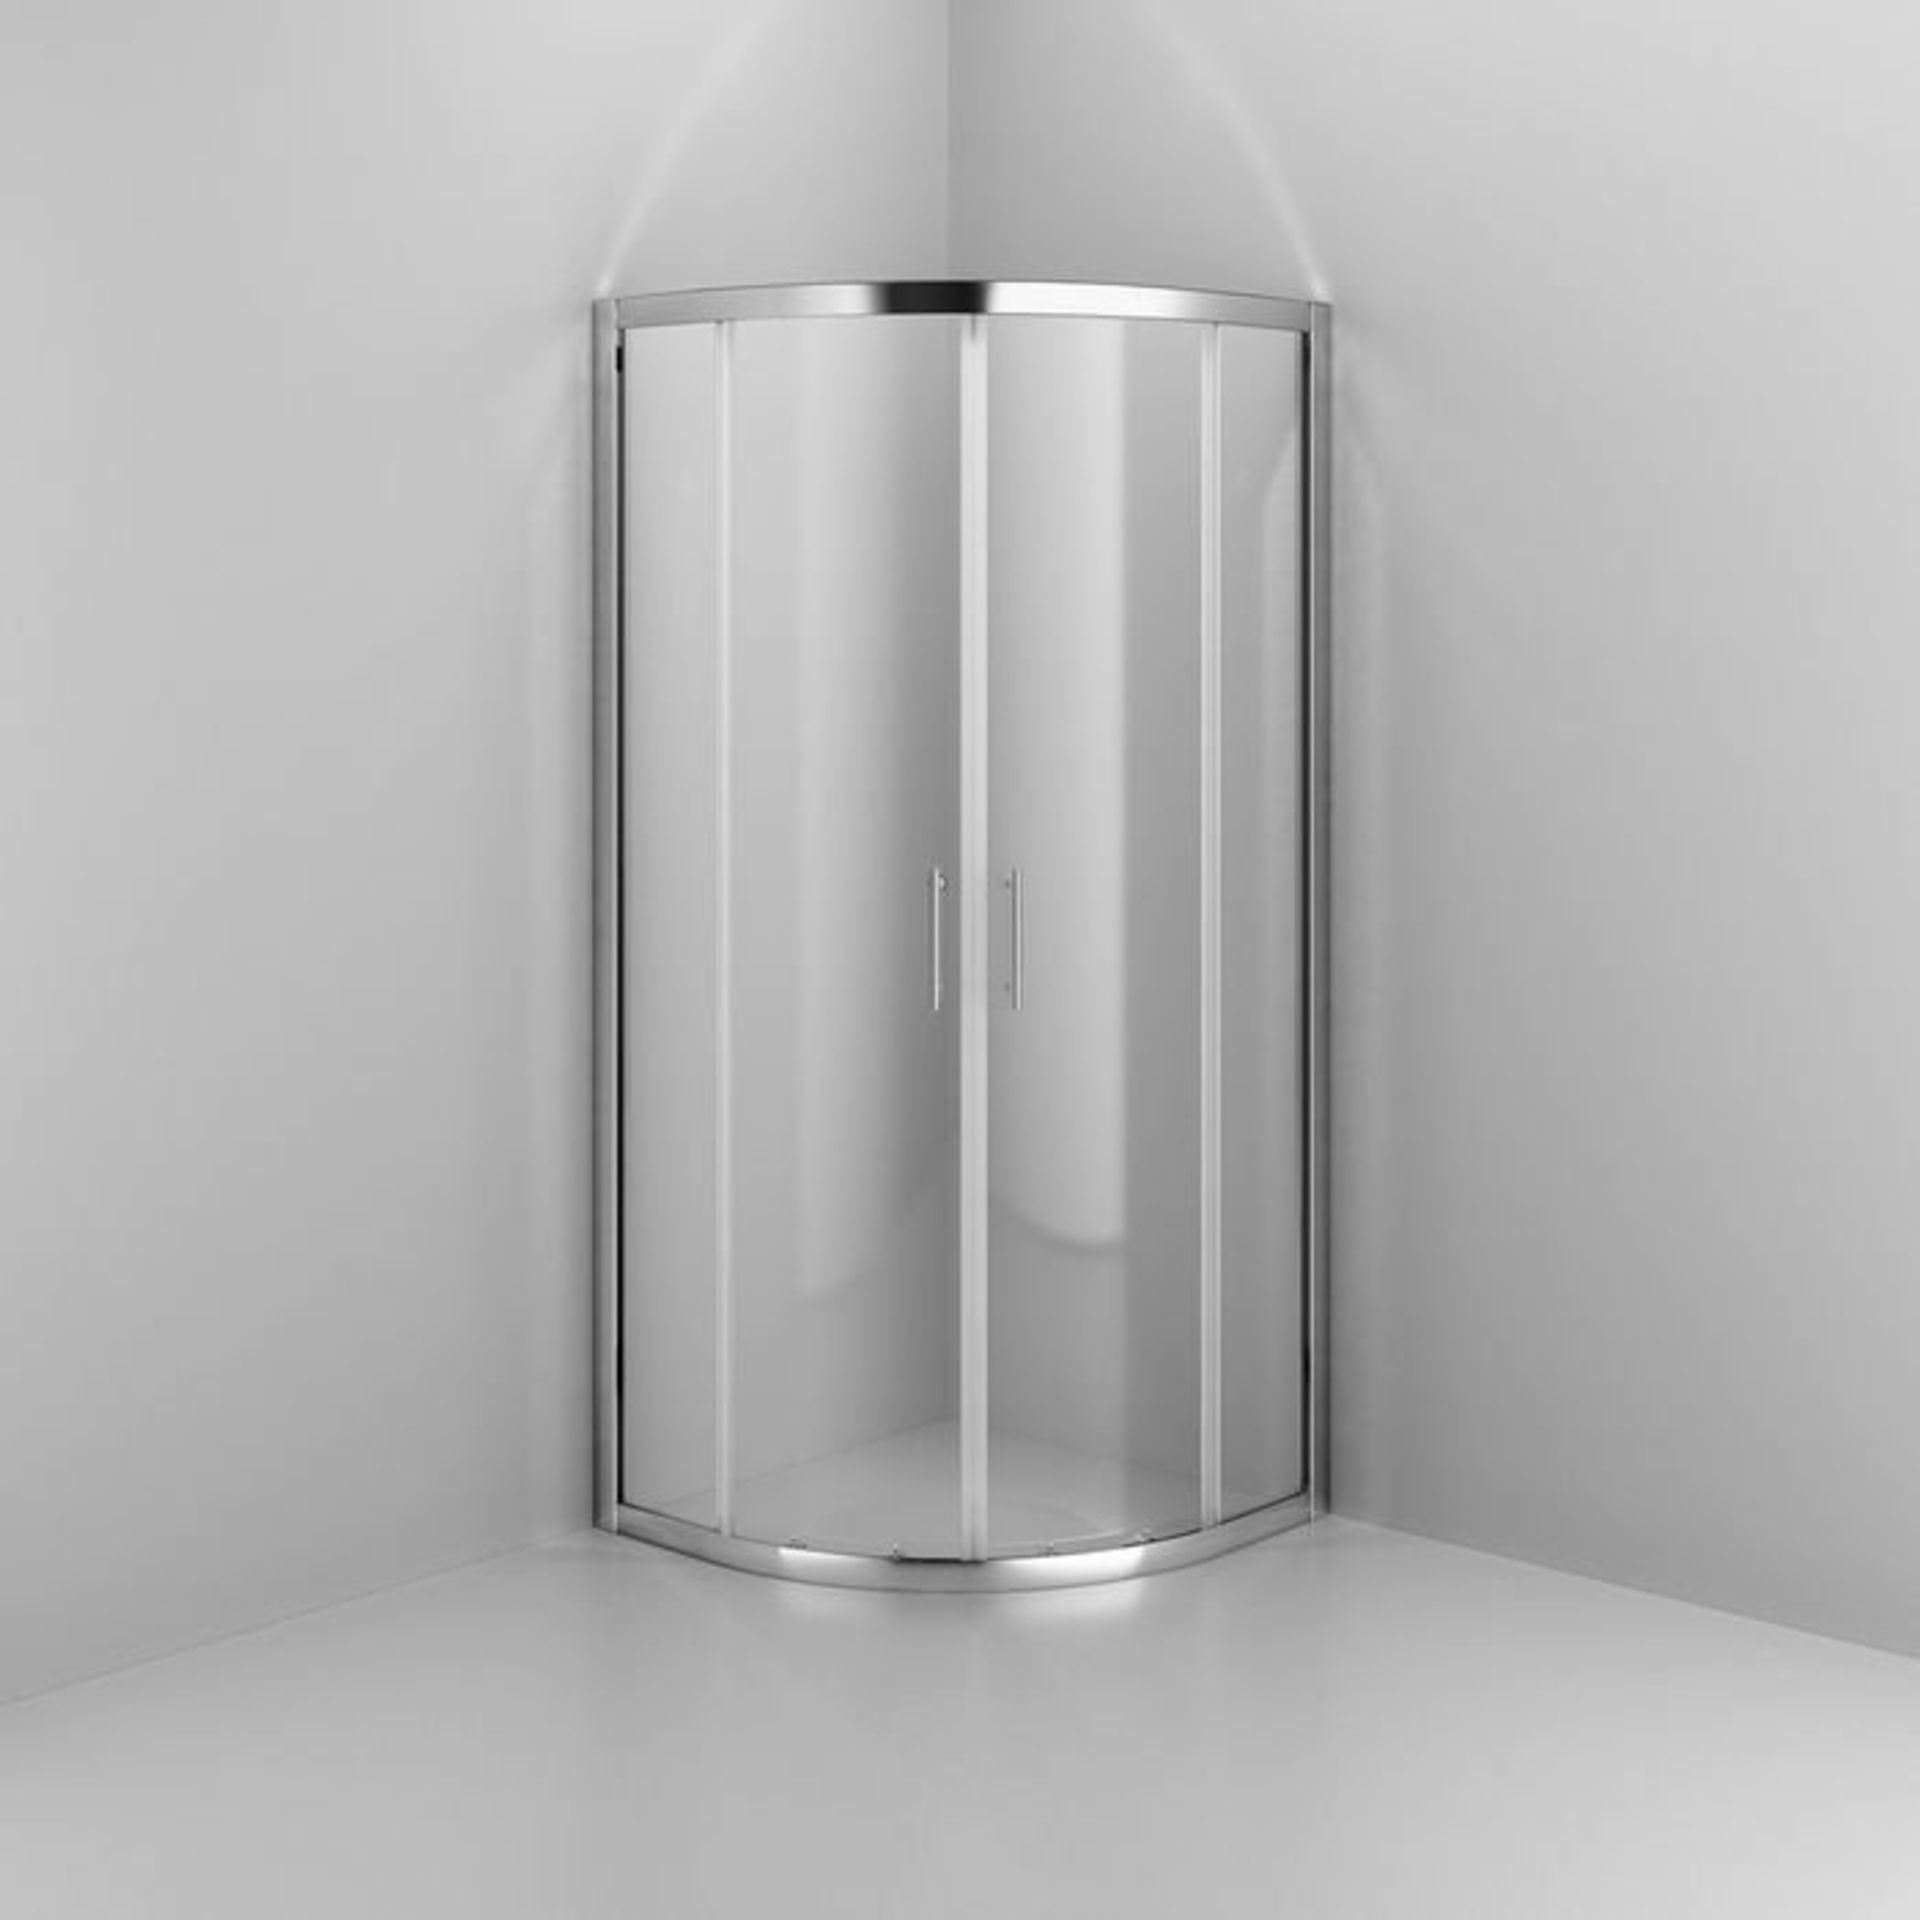 (H53) 800x800mm - 6mm - Elements Quadrant Shower Enclosure RRP £272.99 6mm Safety Glass Fully - Image 4 of 7